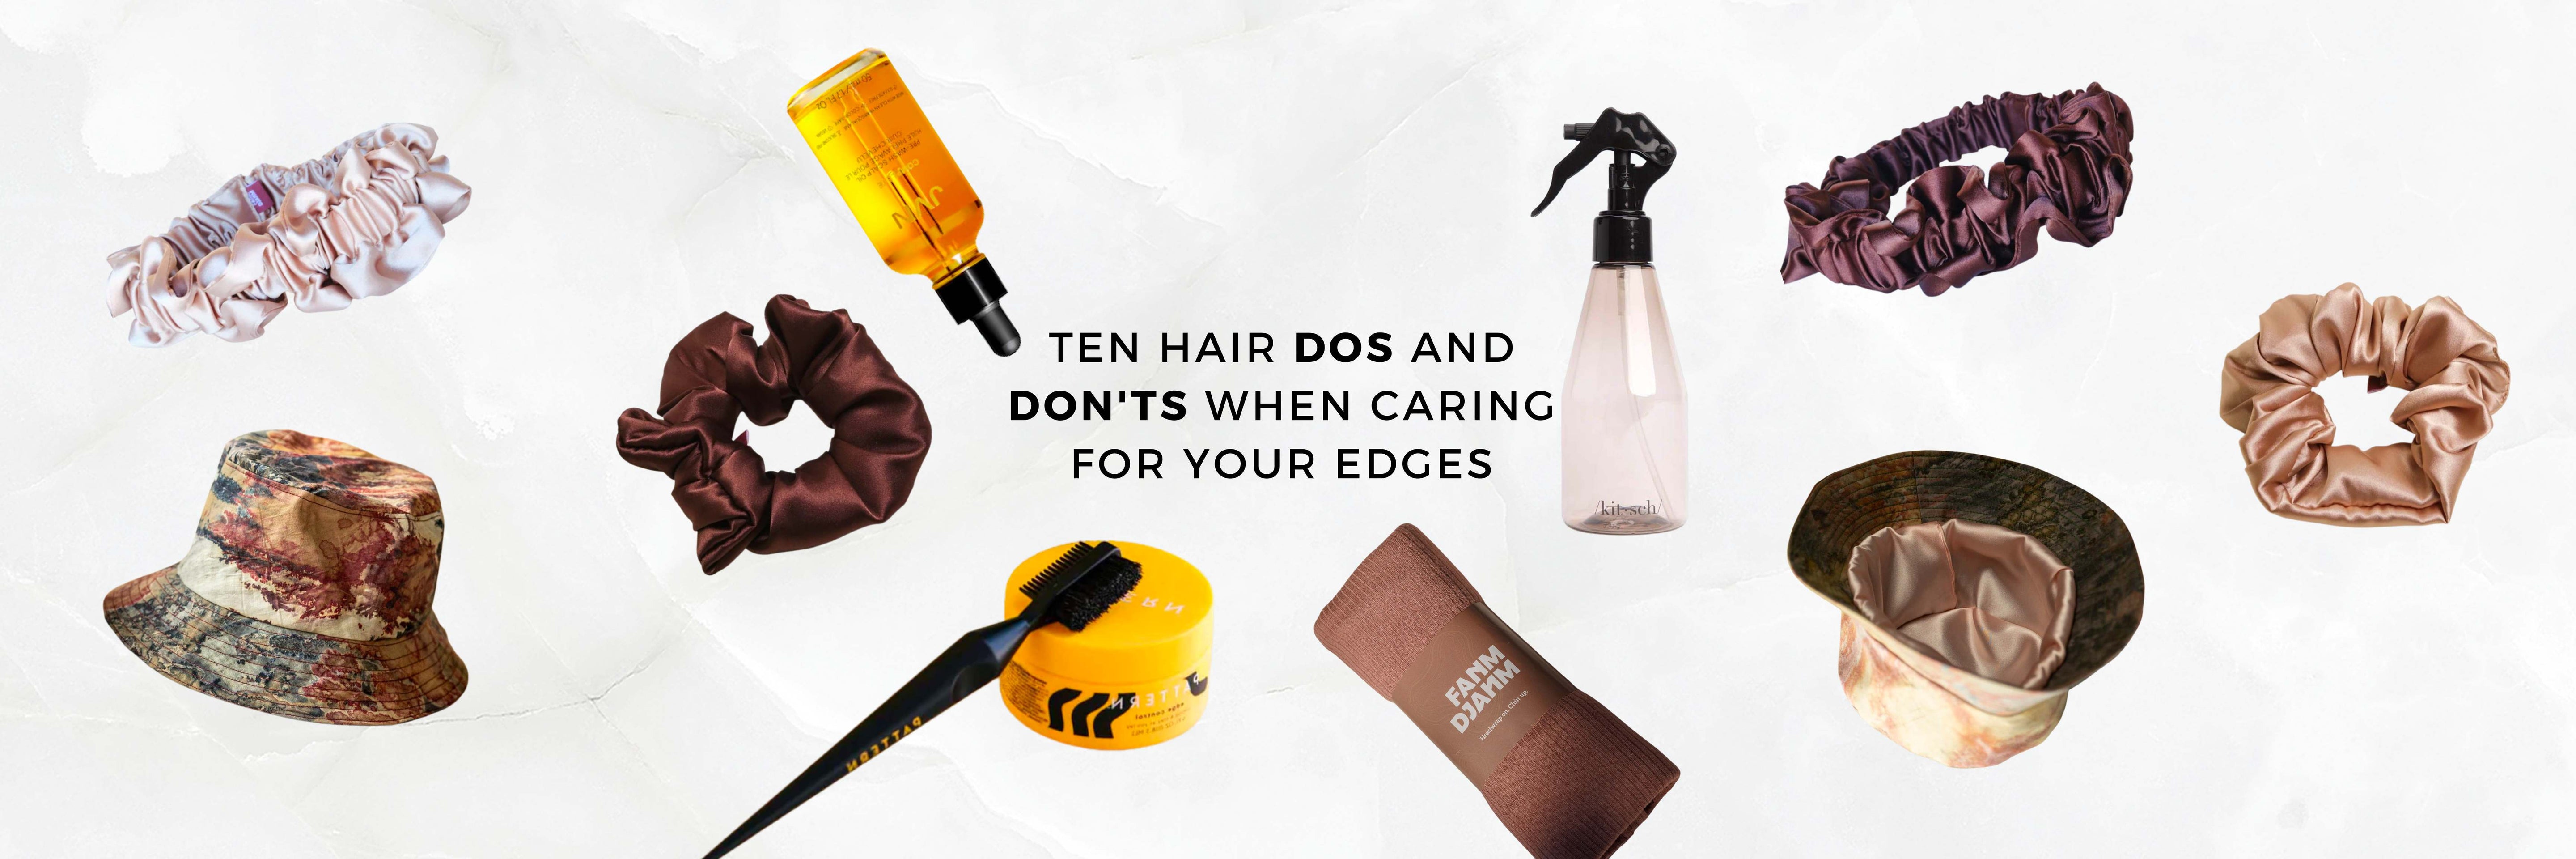 Ten Hair DOs and DON'Ts When Caring For Edges